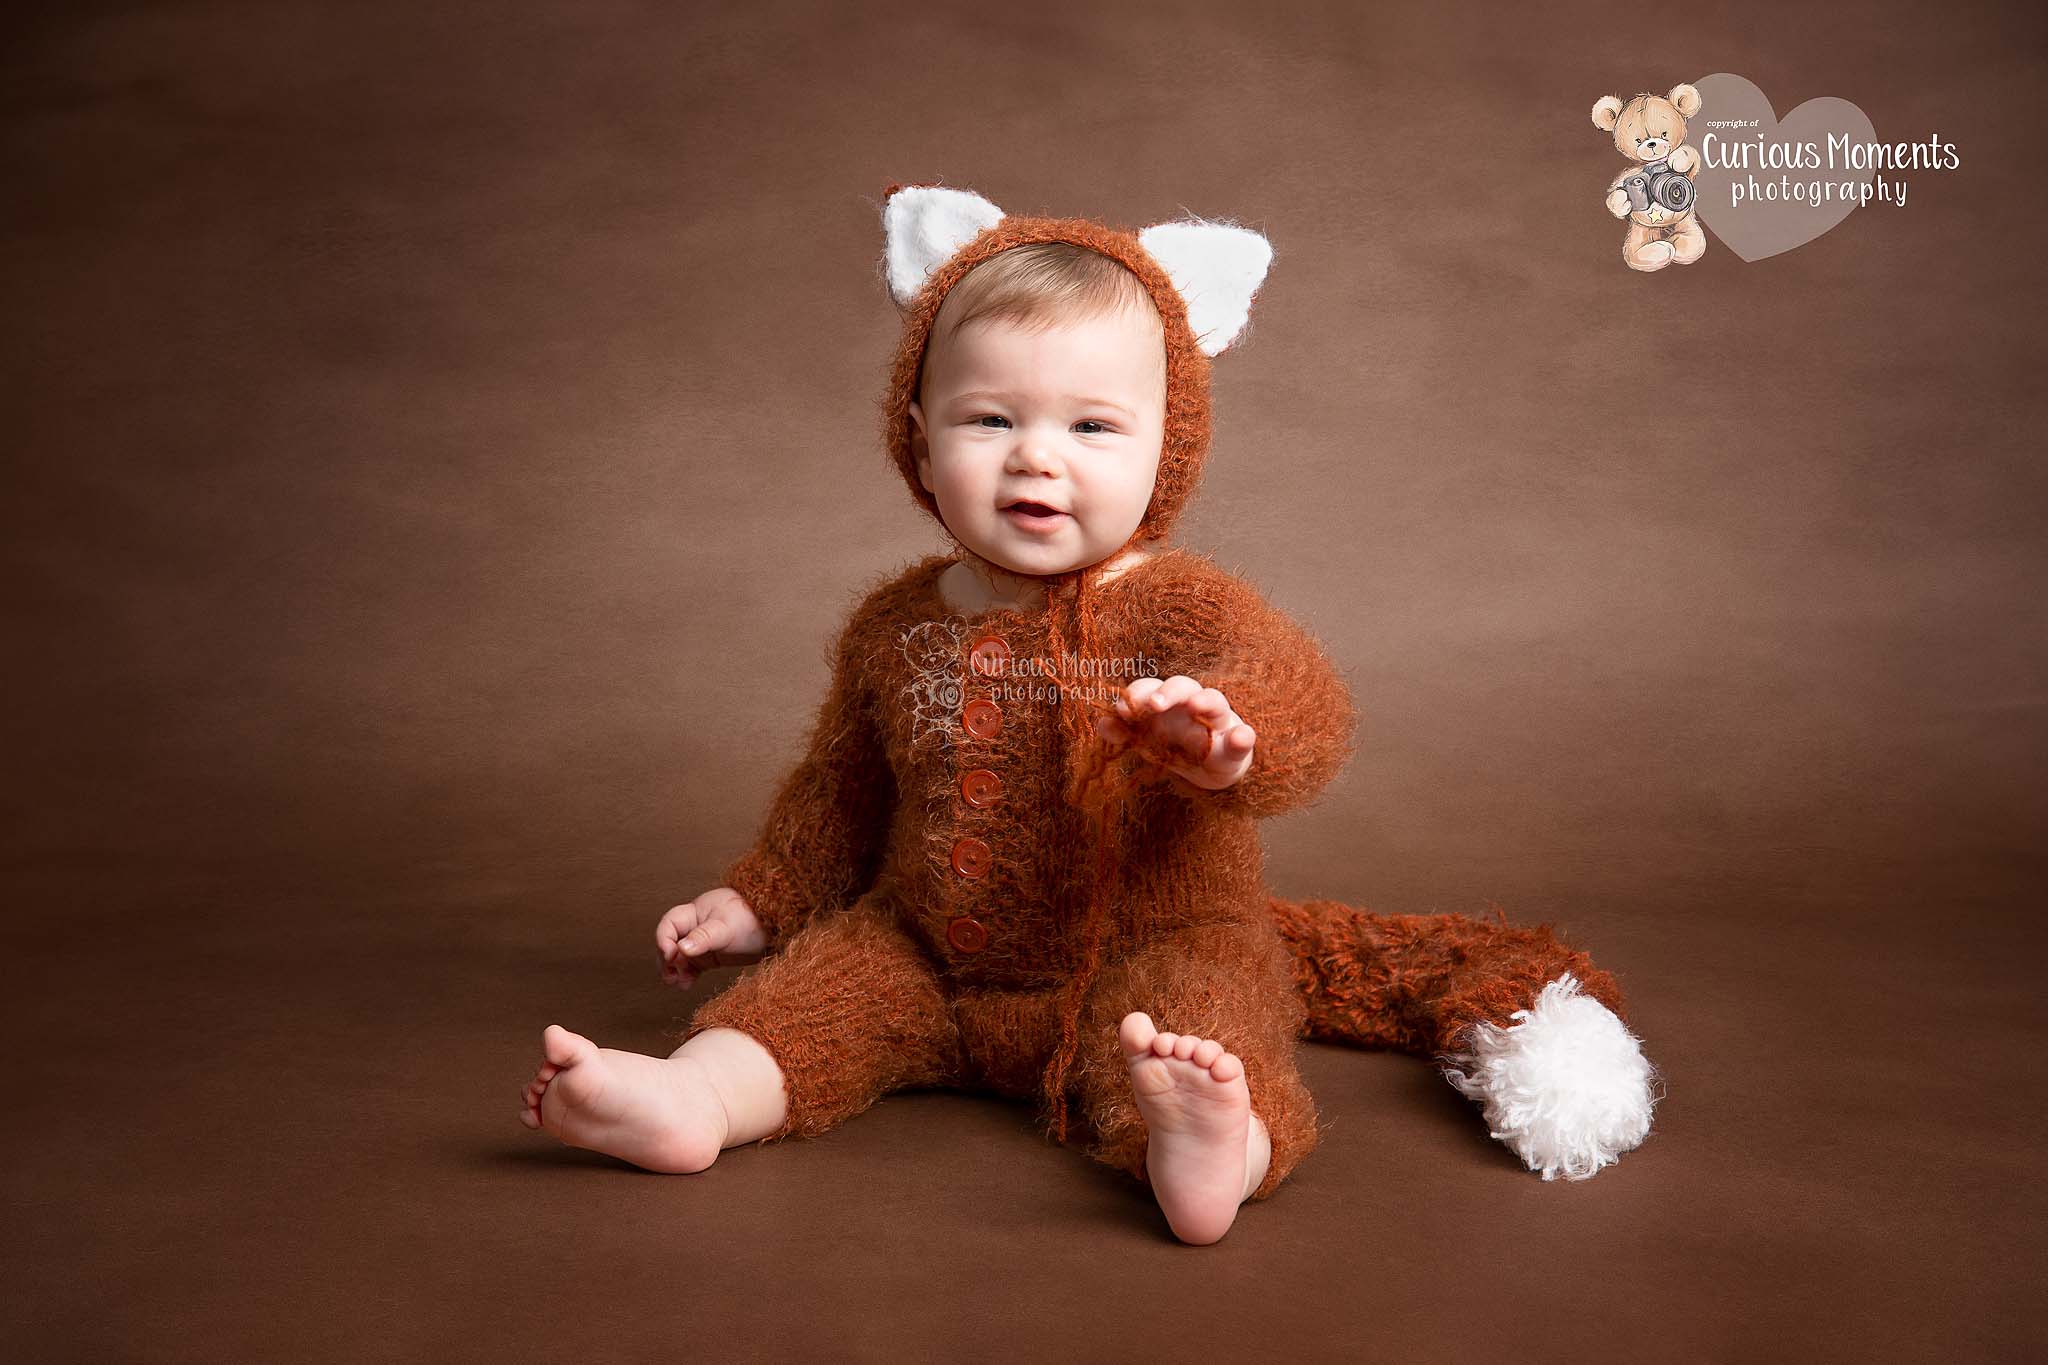 Baby Photographer Carmarthen photographs baby boy in fox outfit who is sitting and smiling at camera